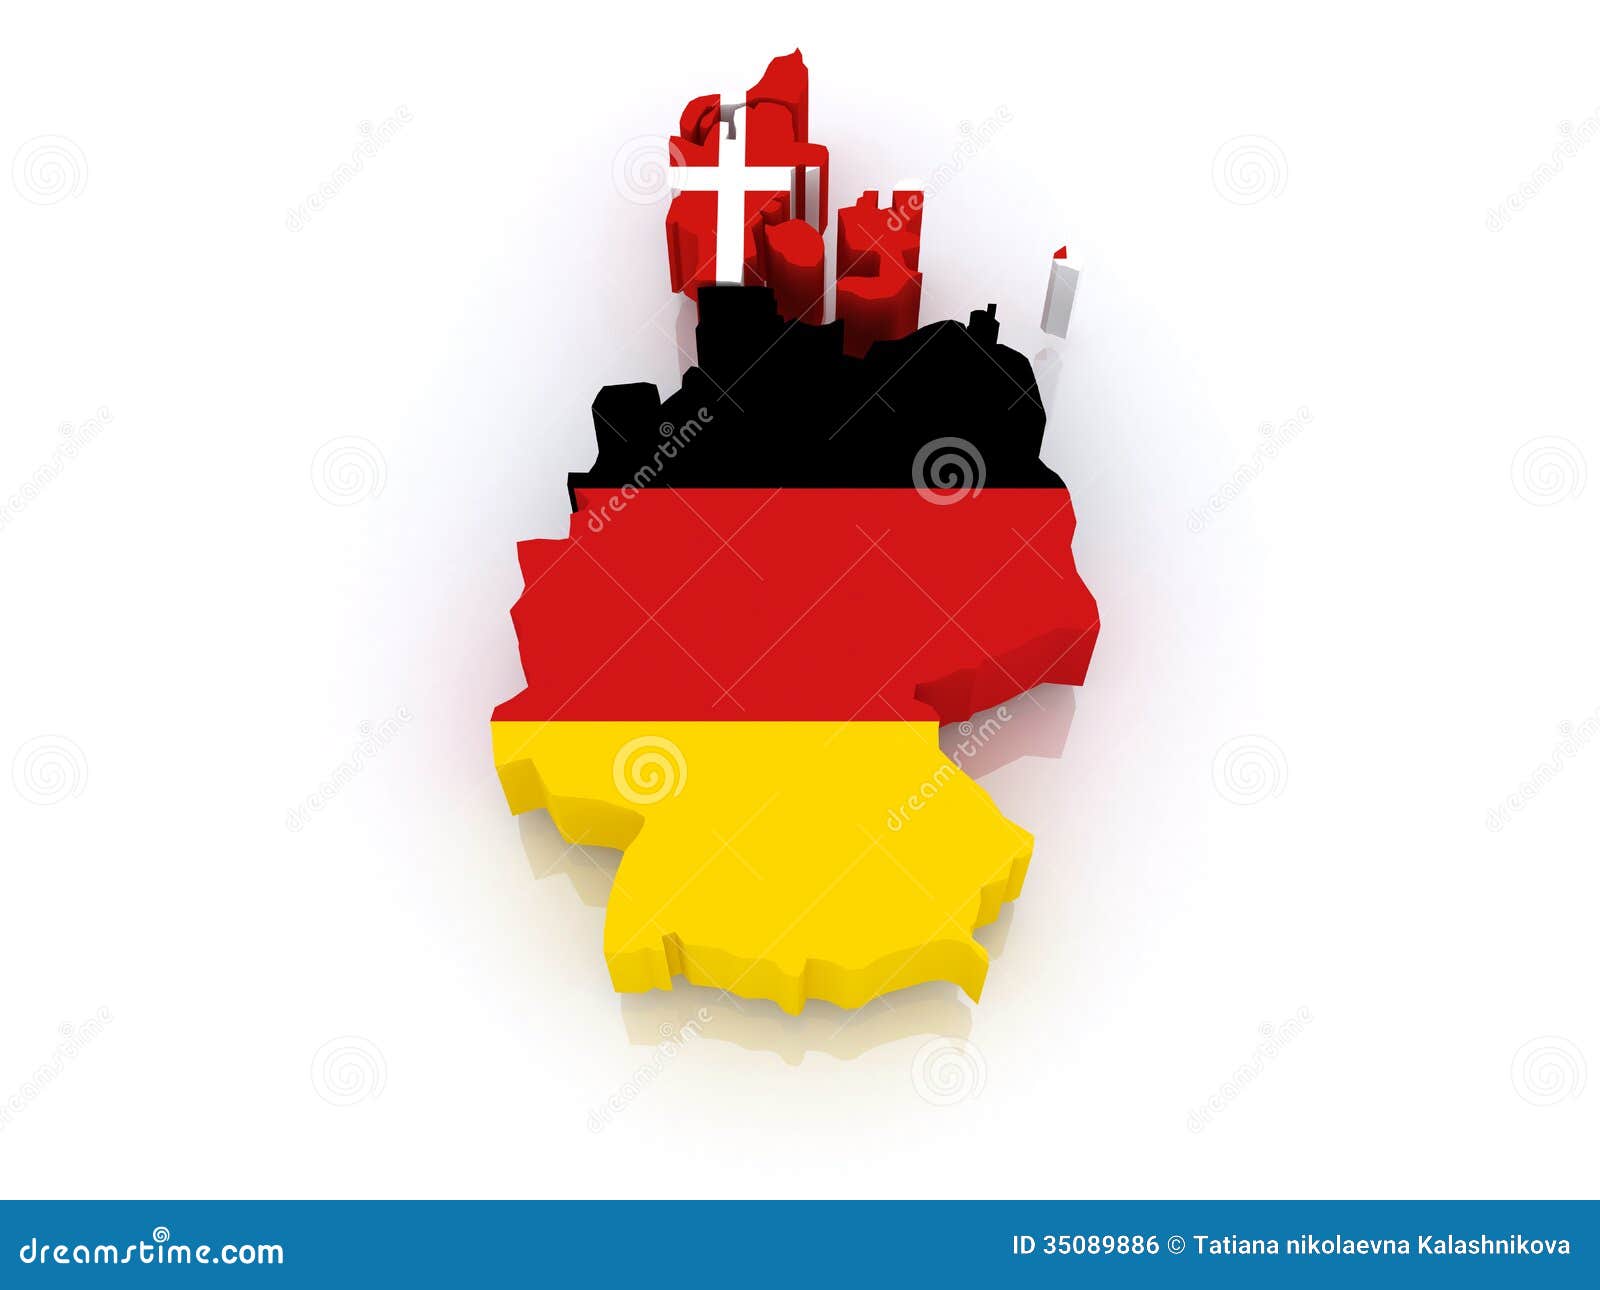 Map Of Denmark And Germany. Stock Illustration ...